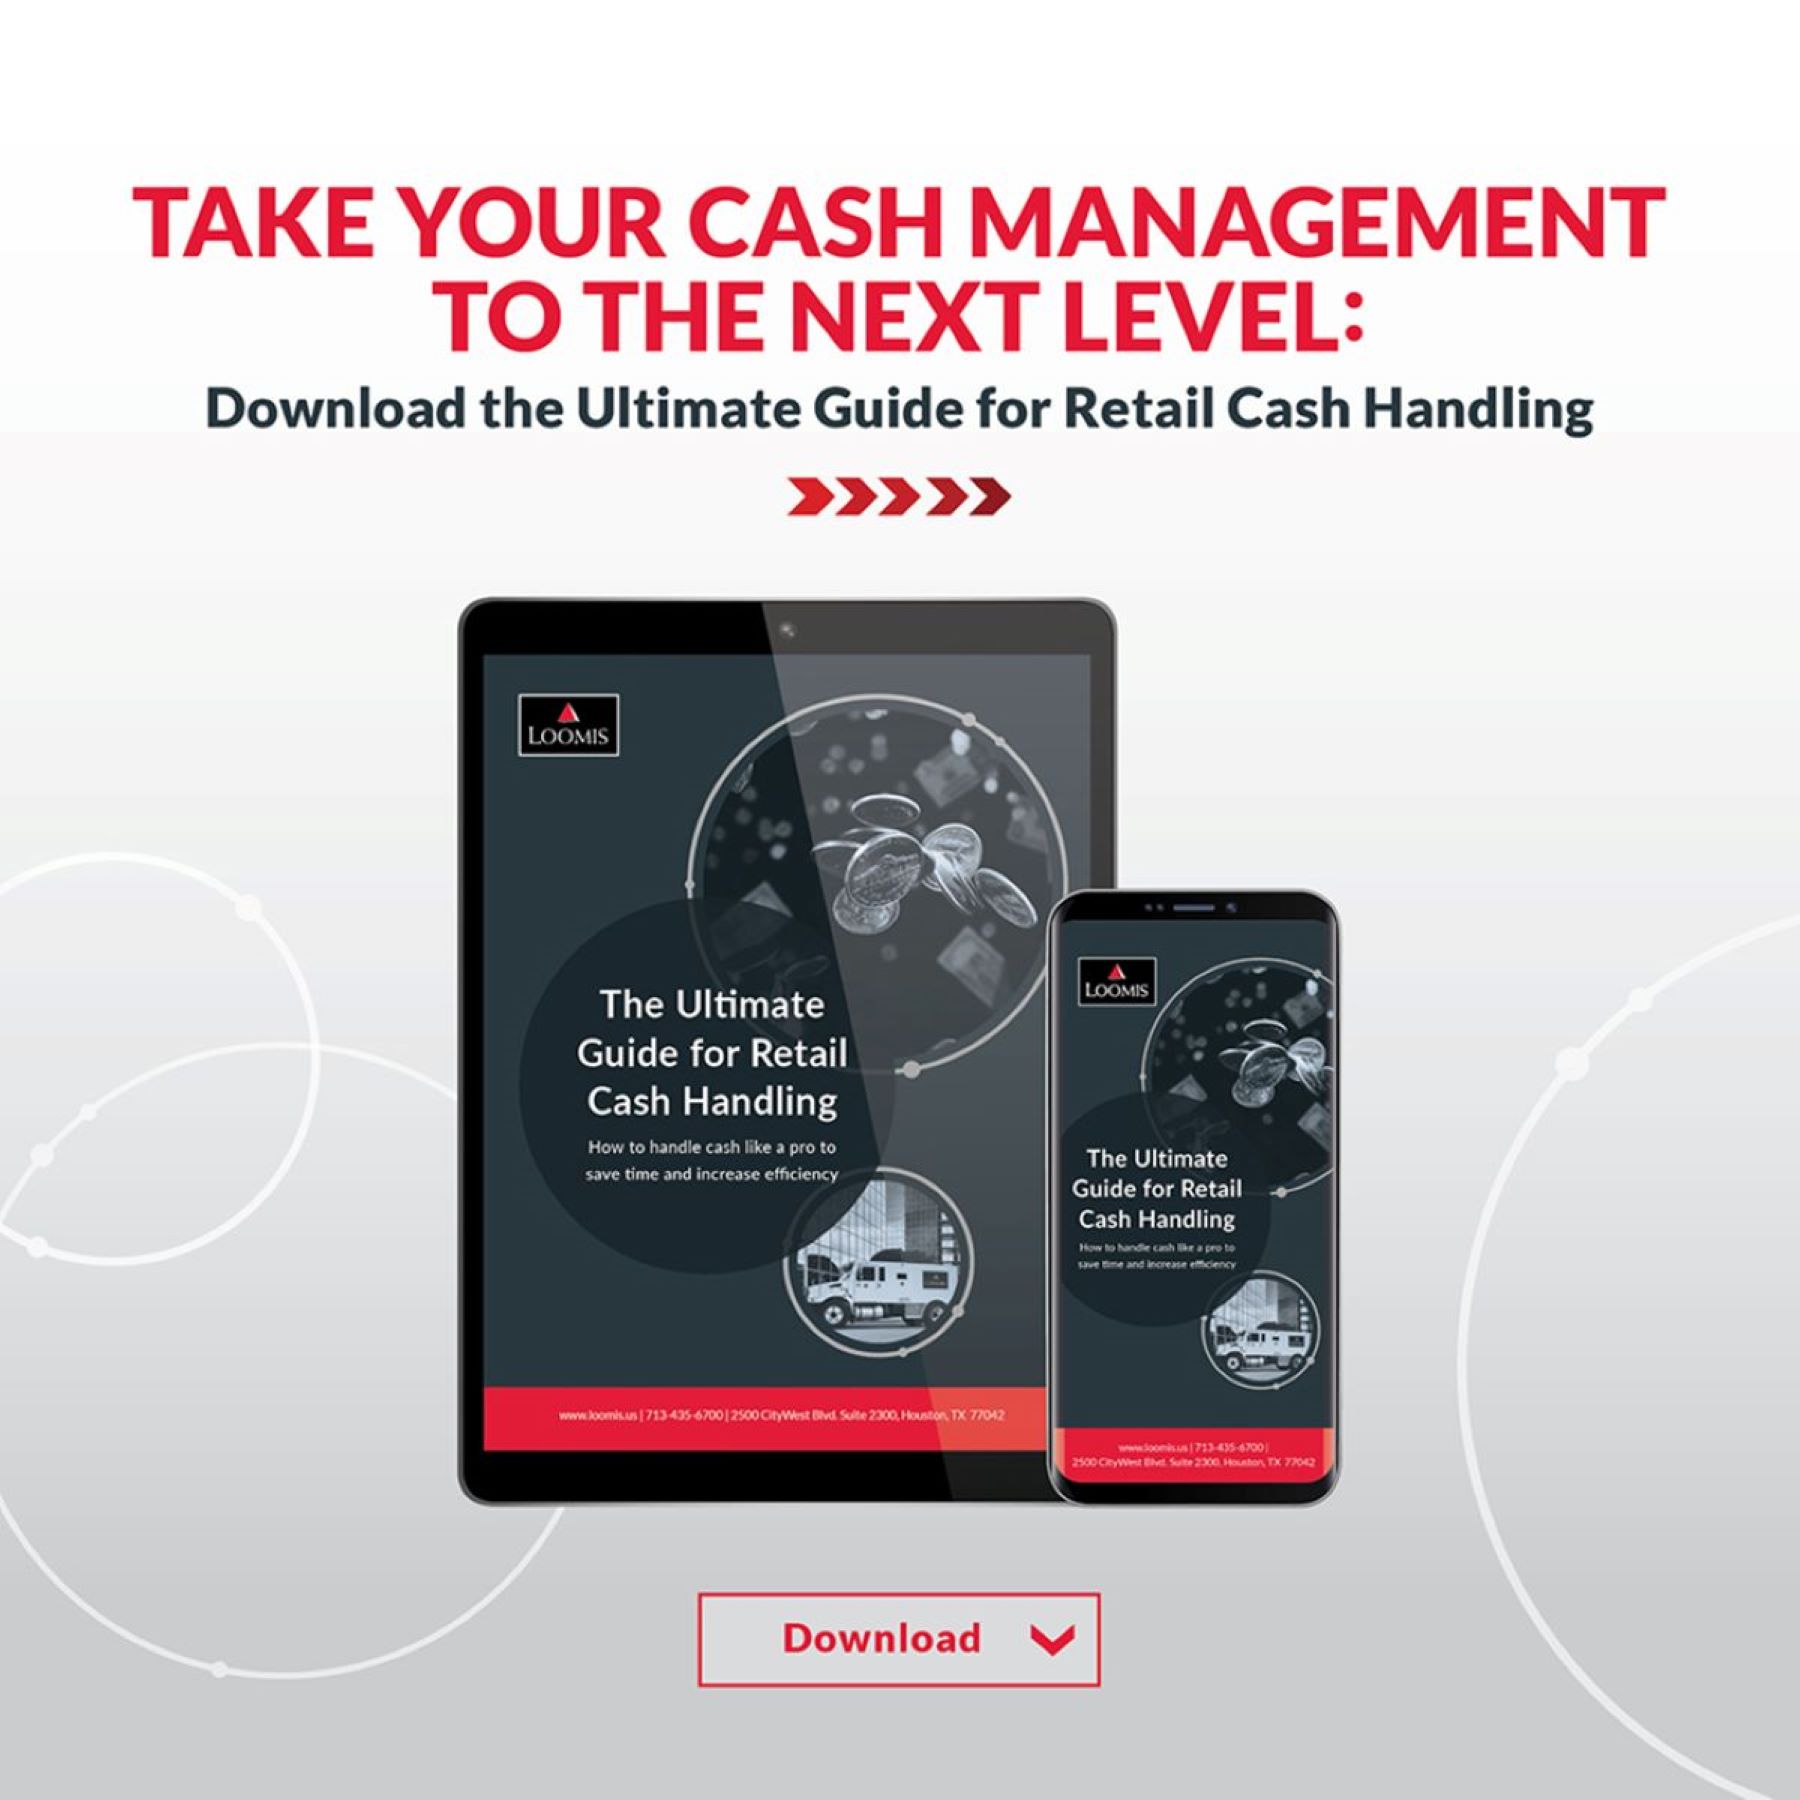 The Ultimate Guide for Retail Cash Handling